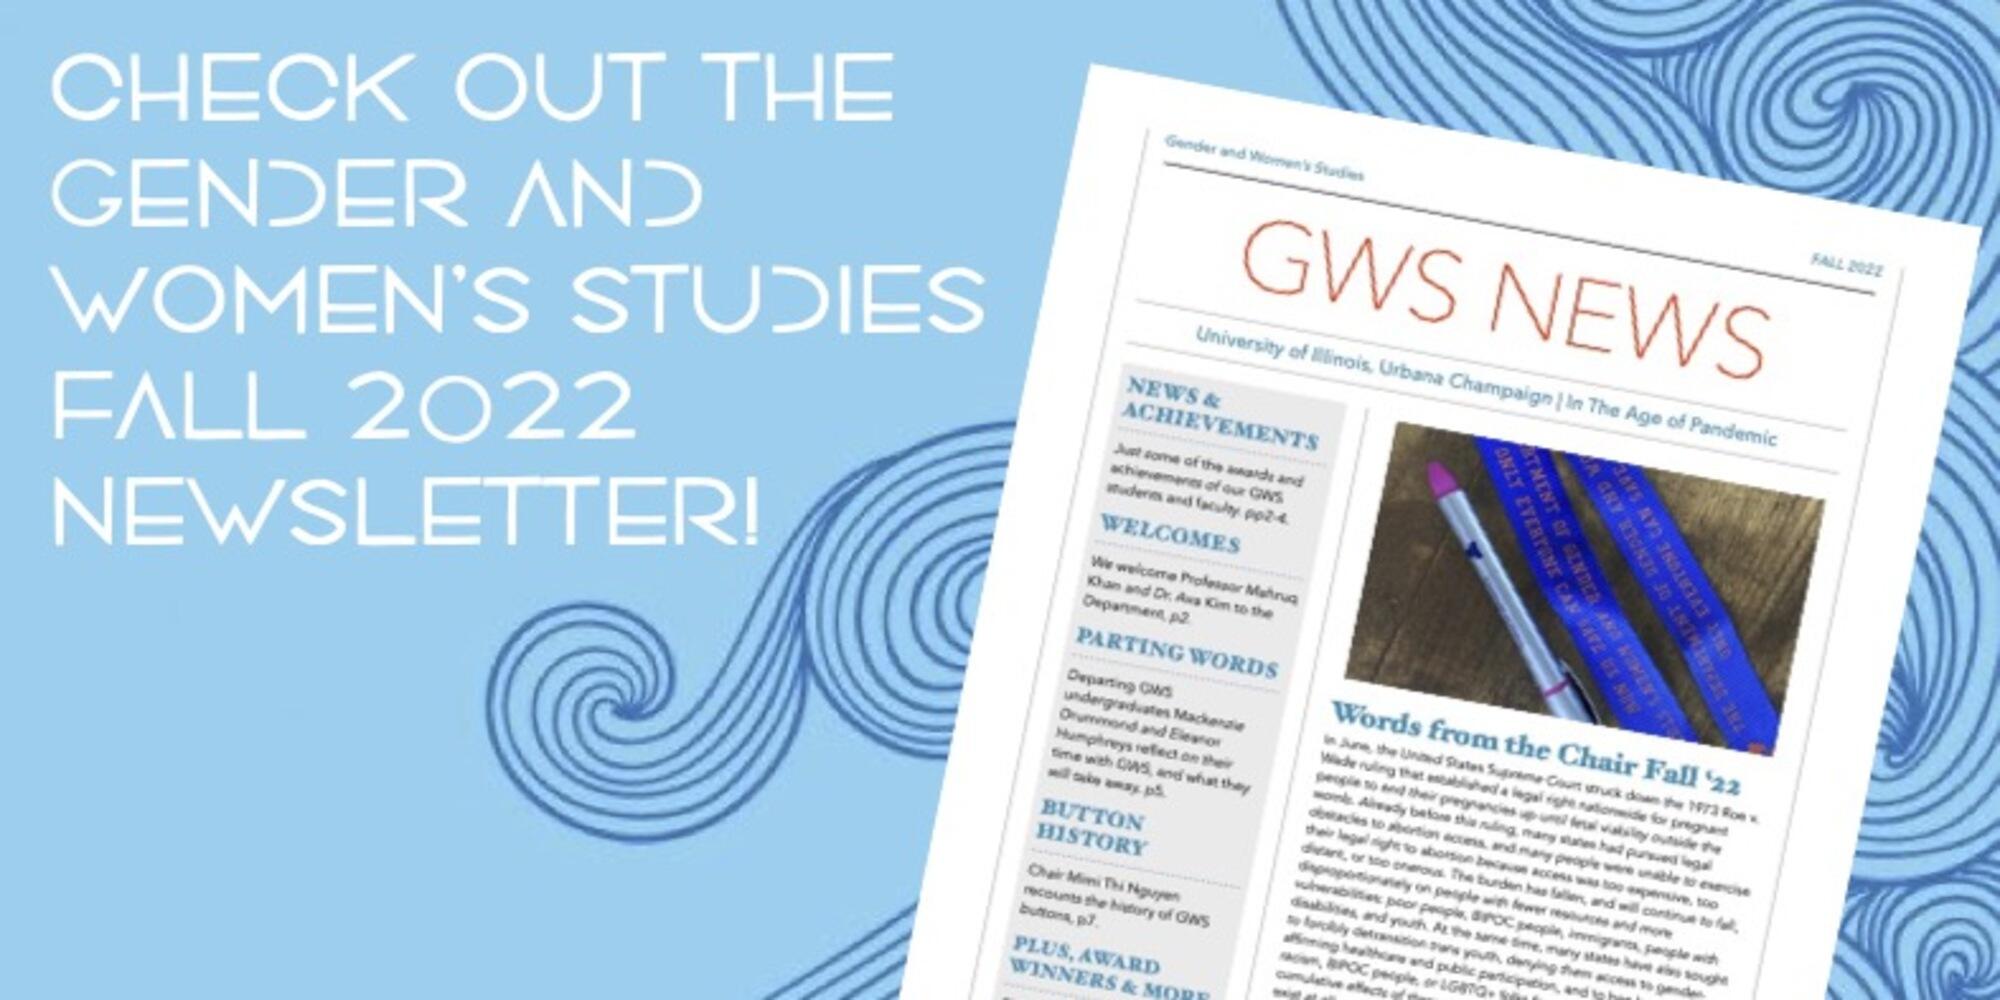 The first page of the GWS 2022 Newsletter over a blue background with waves and white text: "Check out the Gender and Women's Studies Fall 2022 Newsletter!